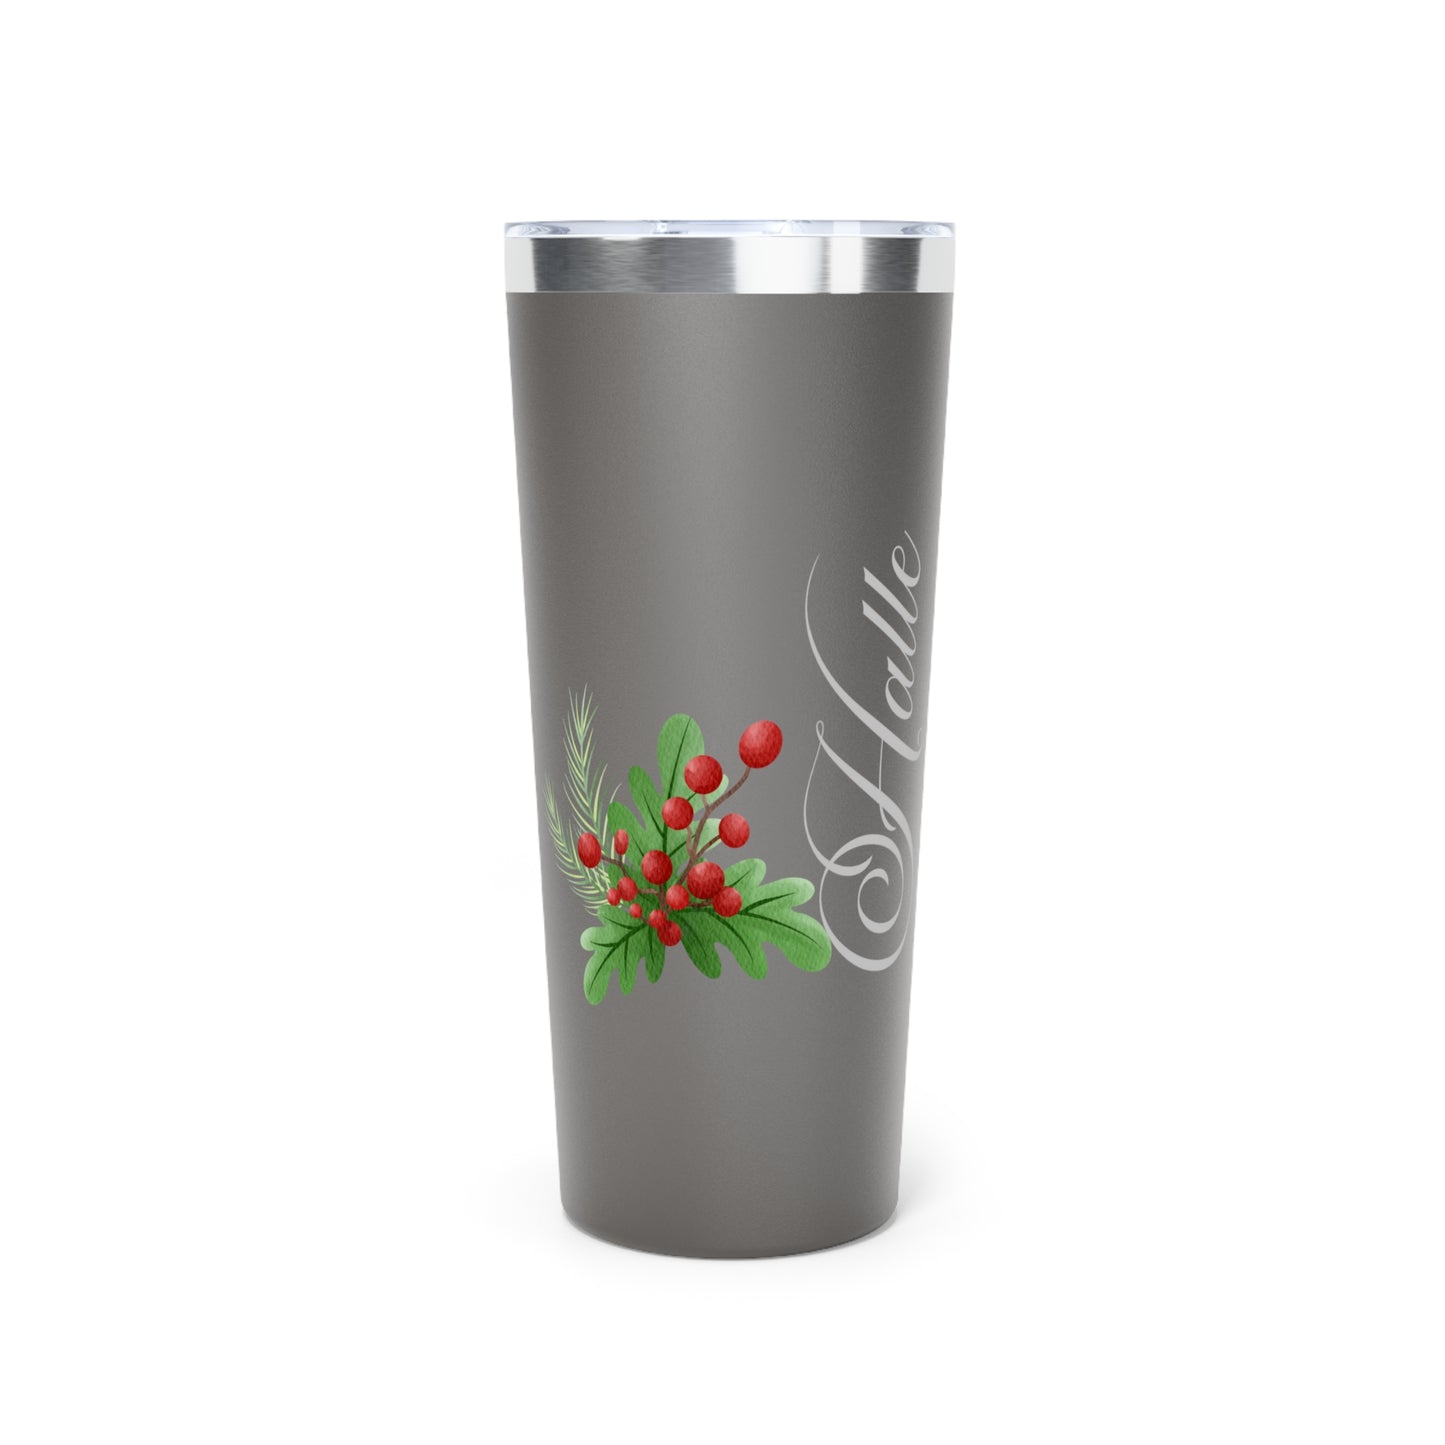 December Personalized Birth Flower Tumbler, Personalized Birth Flower Coffee Cup With Name, Gifts for Her, Bridesmaid Proposal, Party Favor